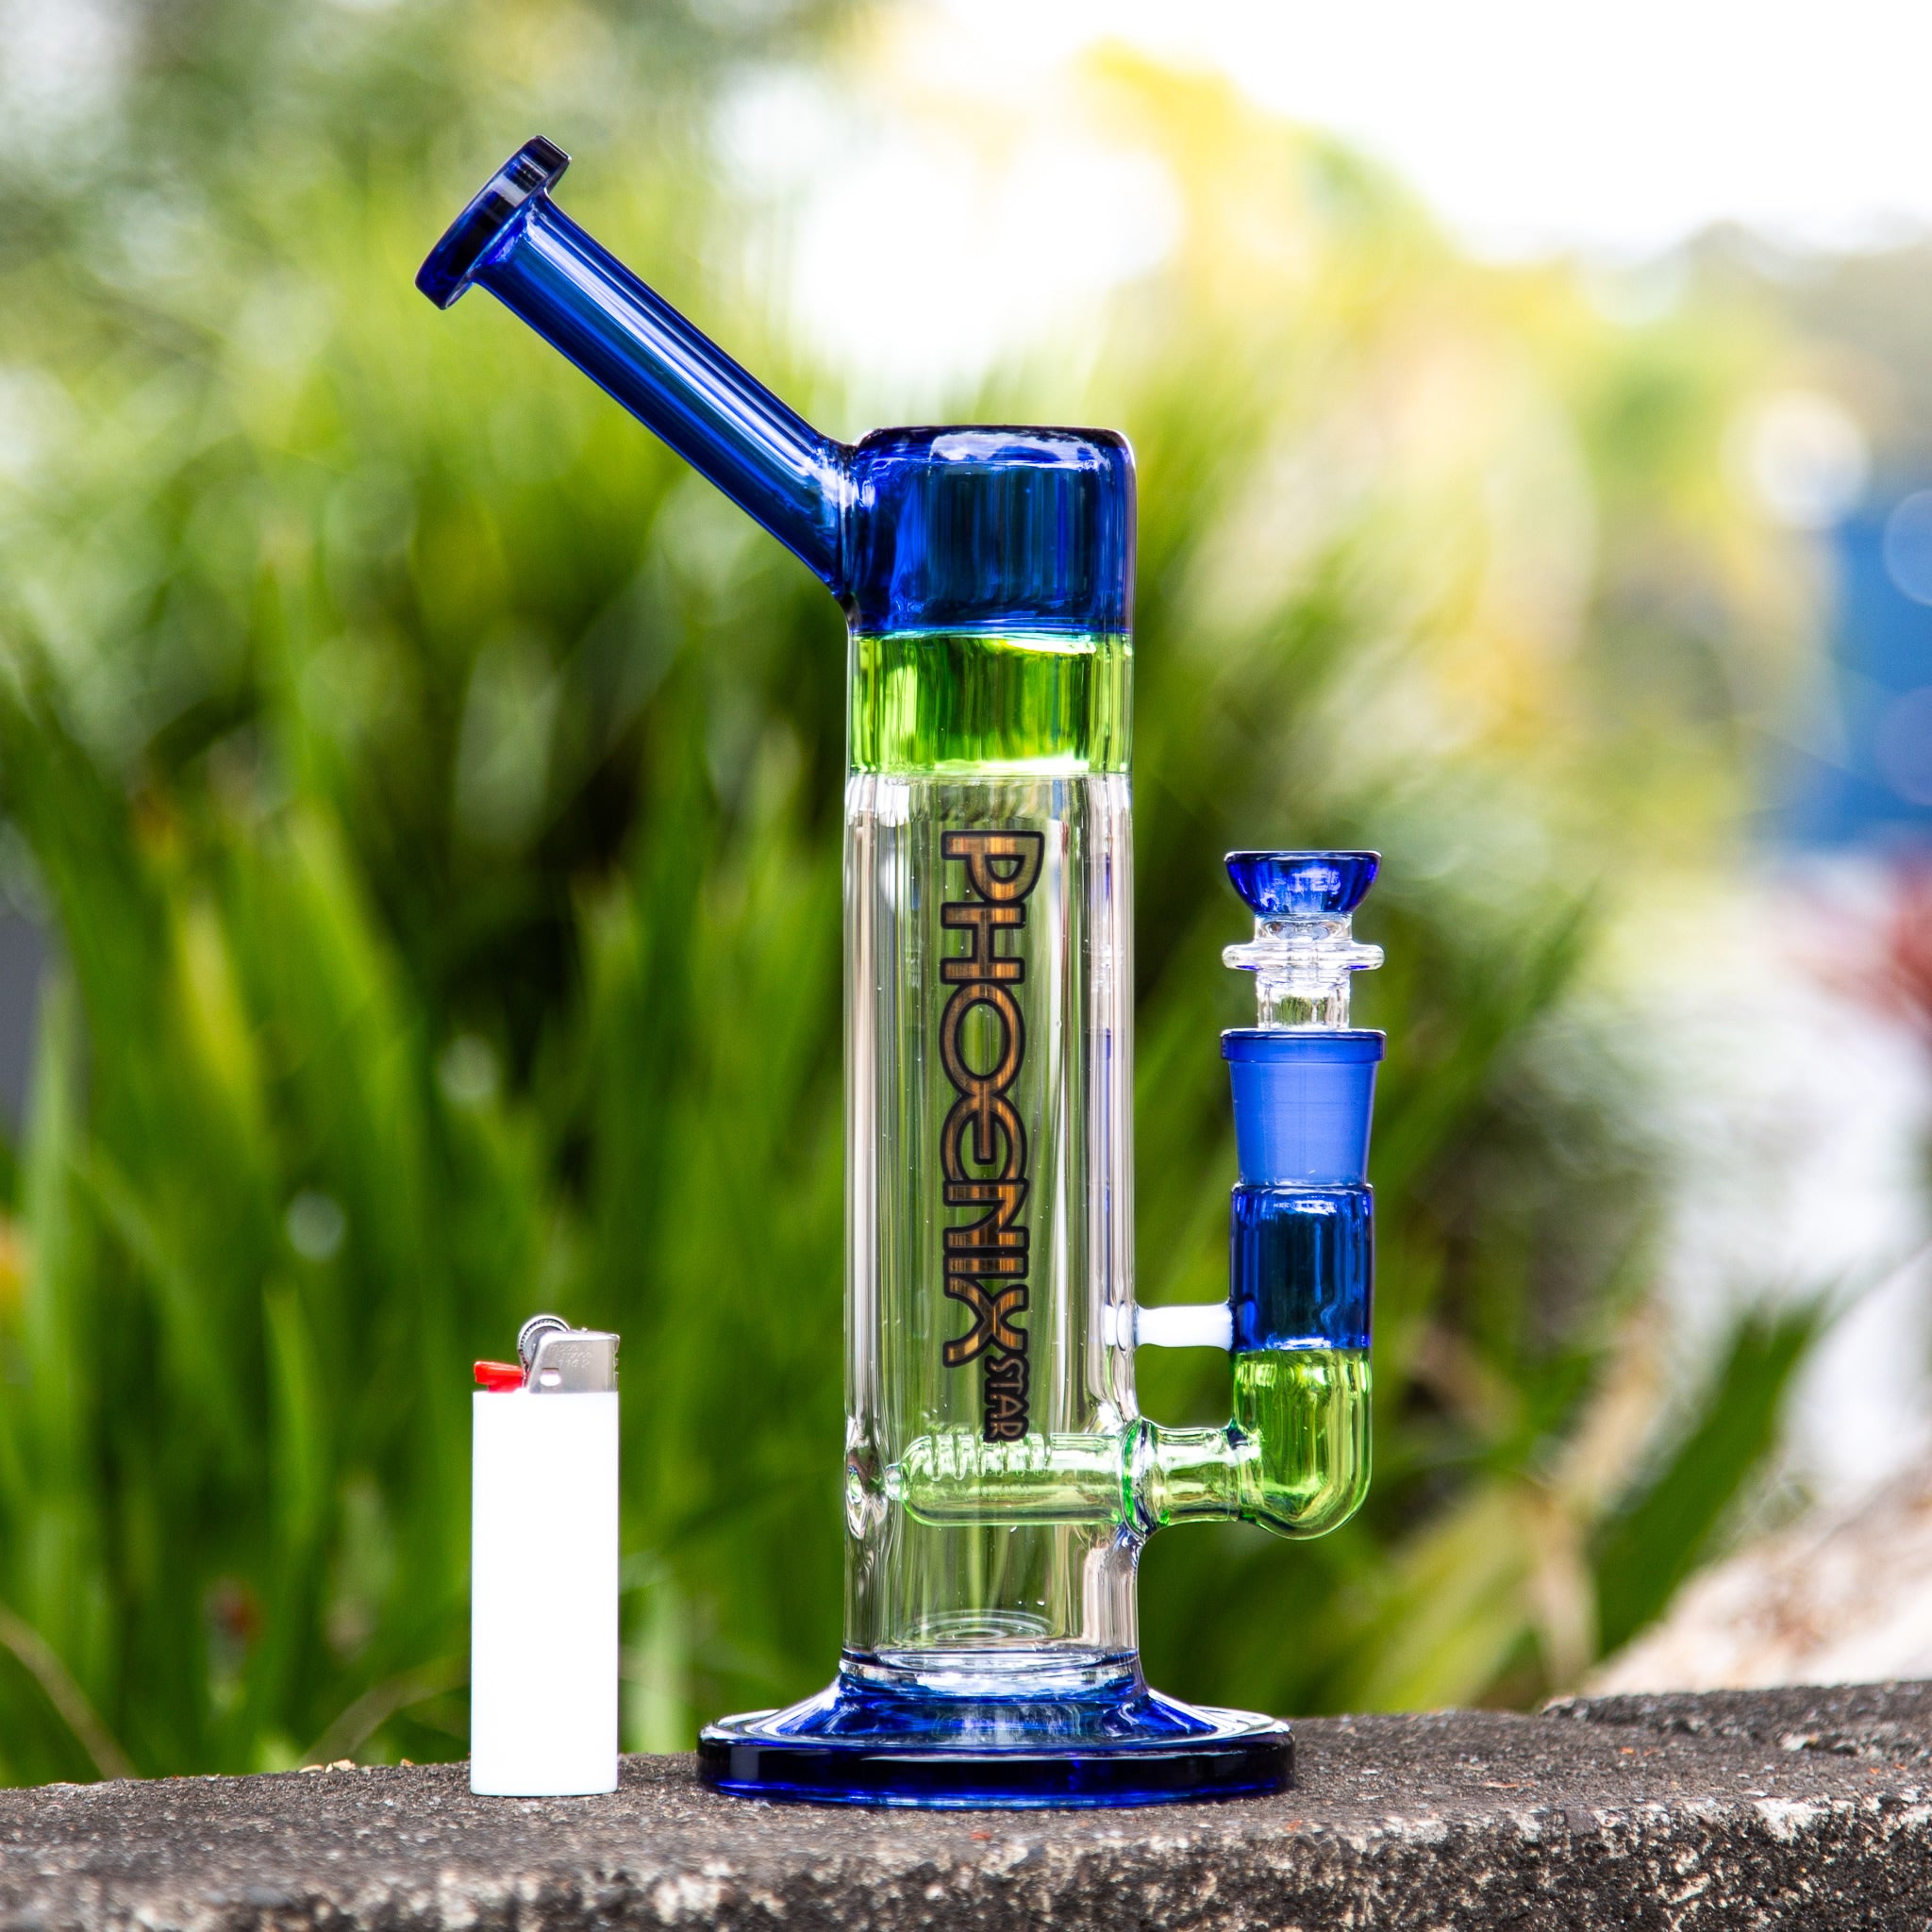 Blue and green medium size glass bong for Aussie stoners.